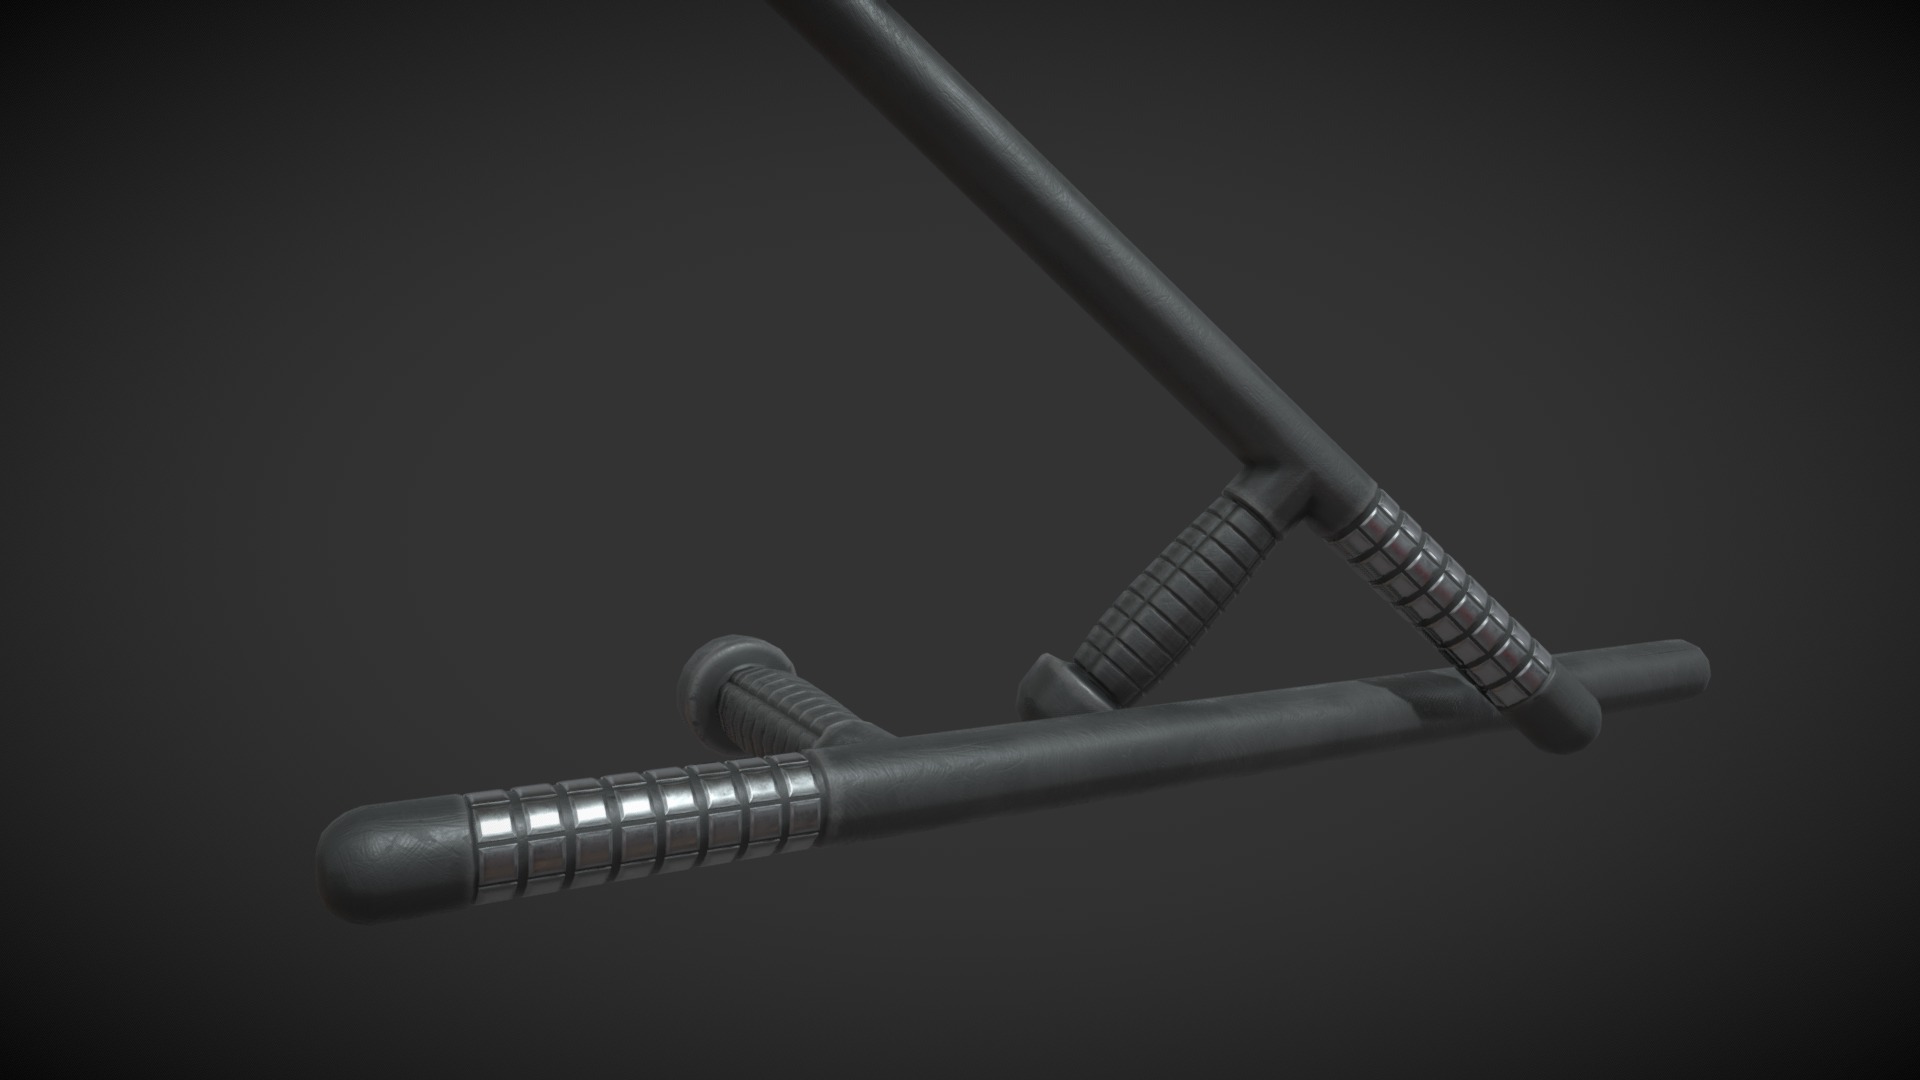 Lowpoly gameready model of police tonfa.
FBX file + metal/roughness pbr set of textures. 
Additional support at discord https://discord.gg/ggPxUnp - Police tactical tonfa - 3D model by The Sinking Sun (@thesinkingsun) 3d model